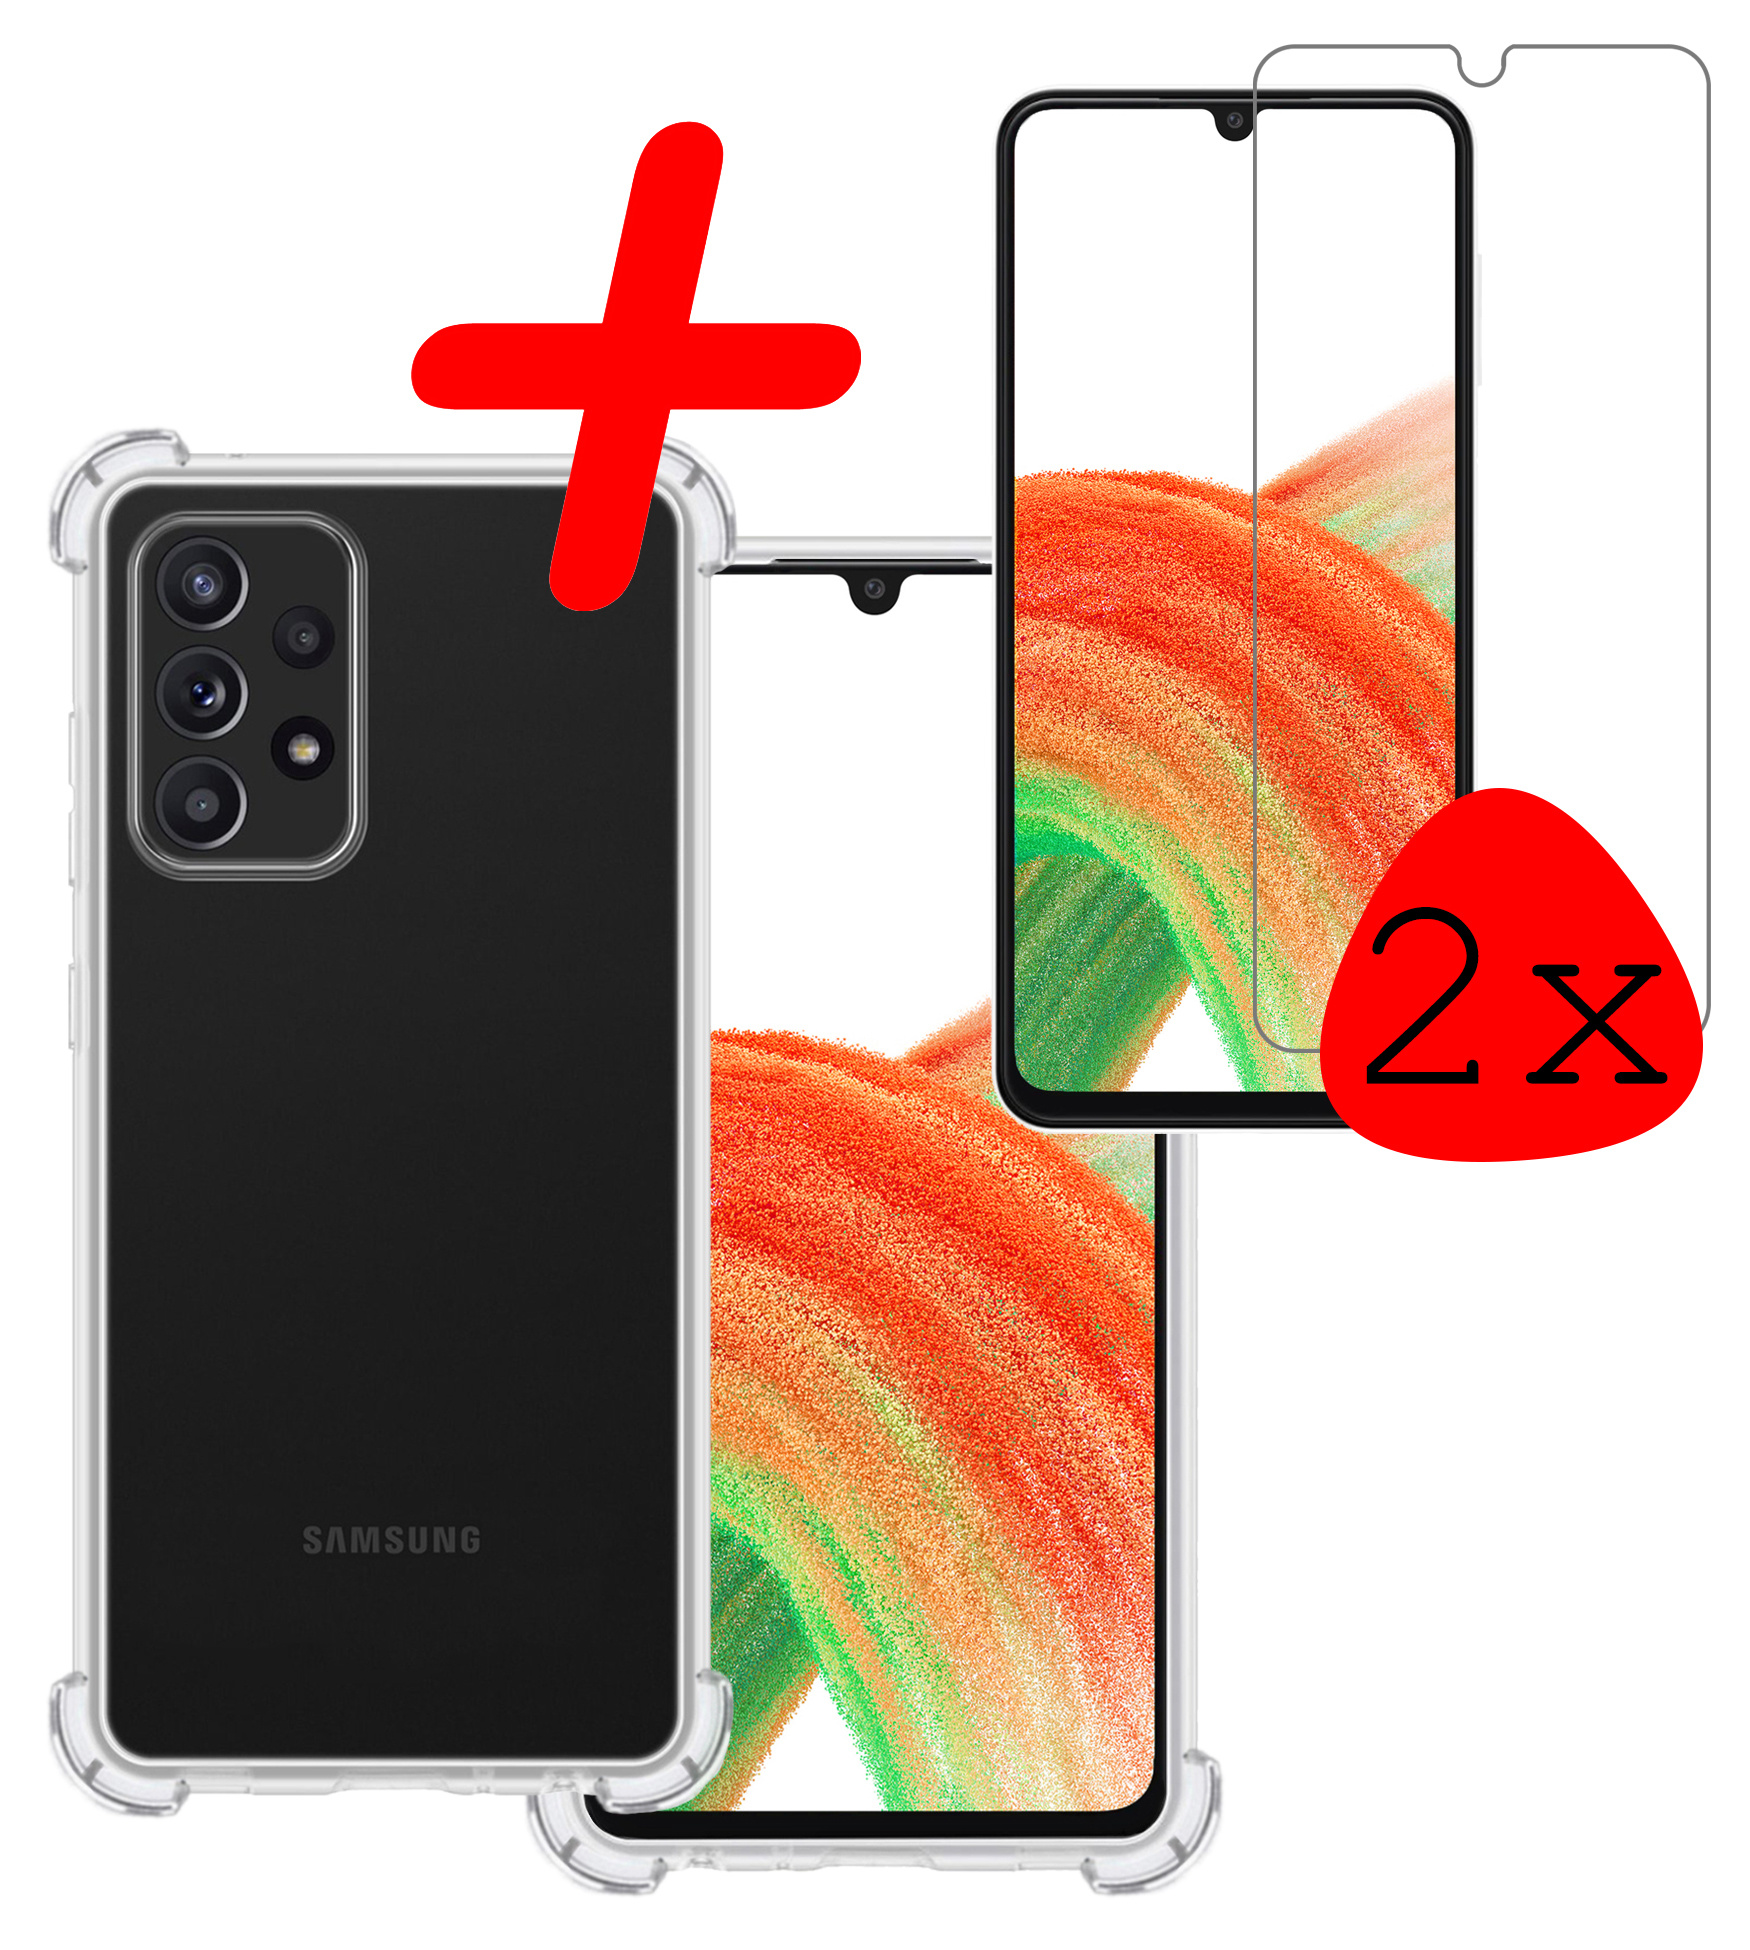 Samsung Galaxy A33 Hoesje Shock Proof Met 2x Screenprotector Tempered Glass - Samsung Galaxy A33 Screen Protector Beschermglas Hoes Shockproof - Transparant